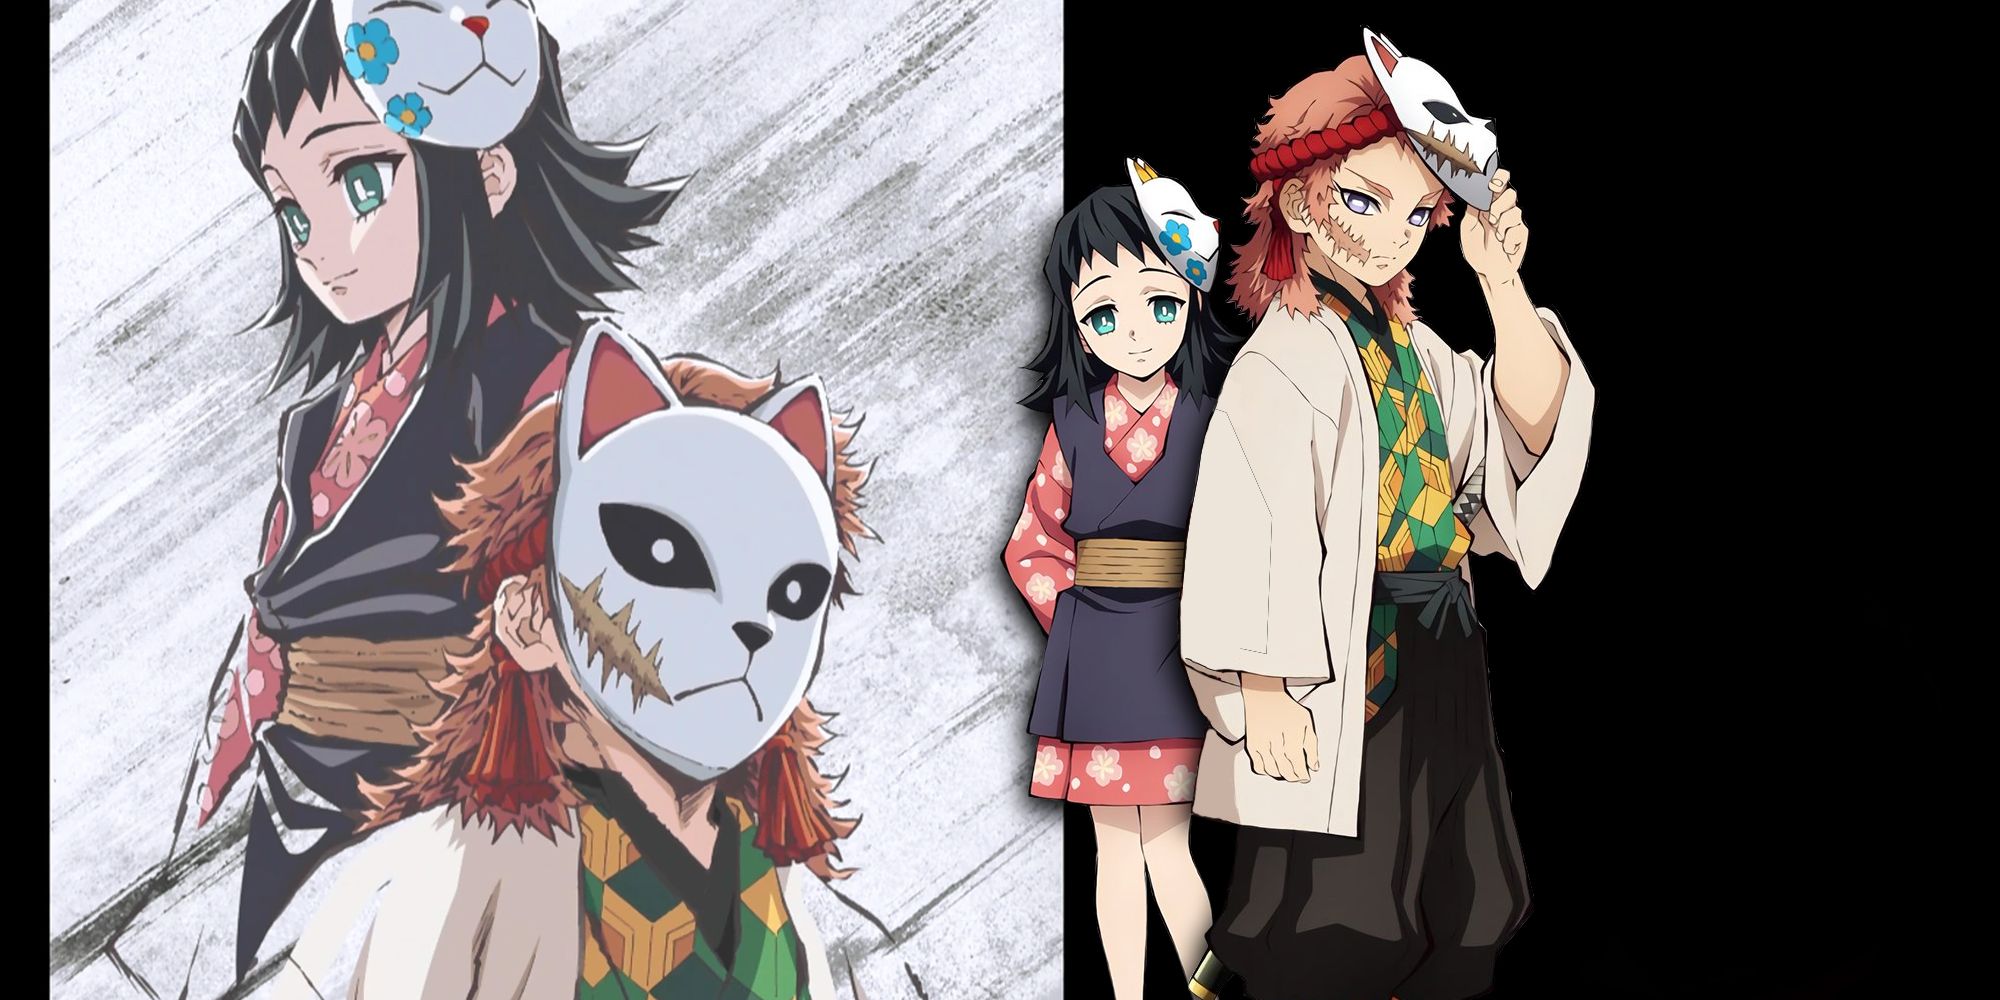 Demon Slayer - Sabito And Makomo Eye Catcher In Anime With PNGs Of Characters On TOp